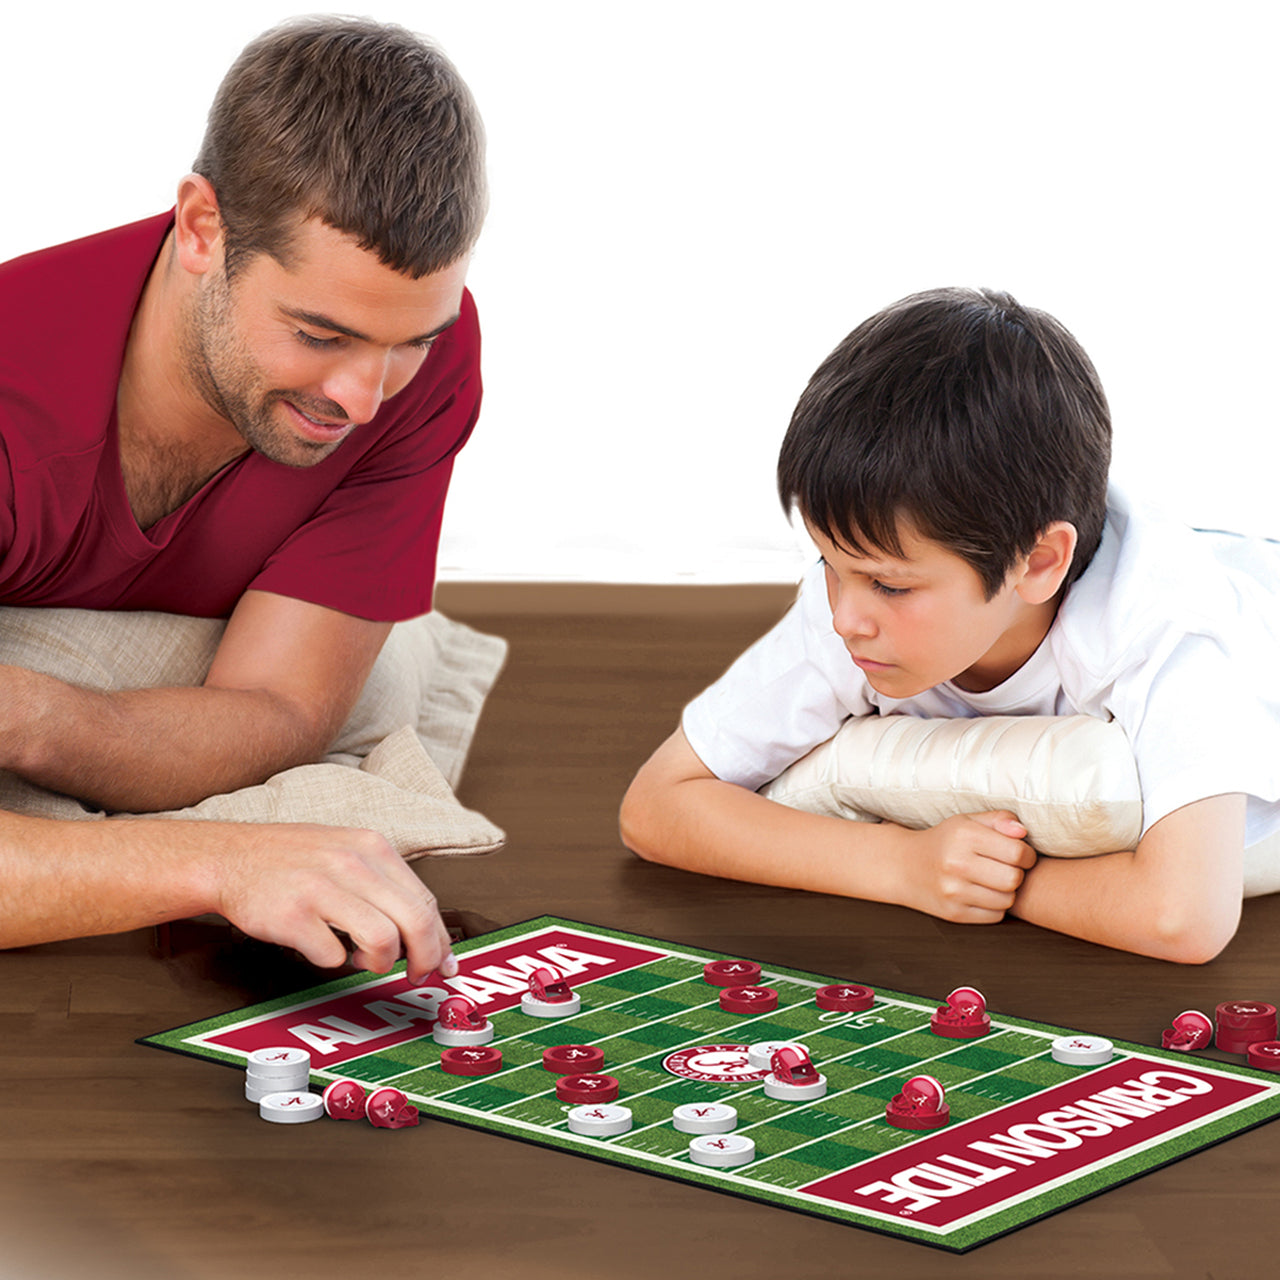 Brand-new Alabama Crimson Tide NCAA Checkers Board Game. Ages 6+. 2 players. Officially licensed by MasterPieces. Roll Tide with football-helmet kings!